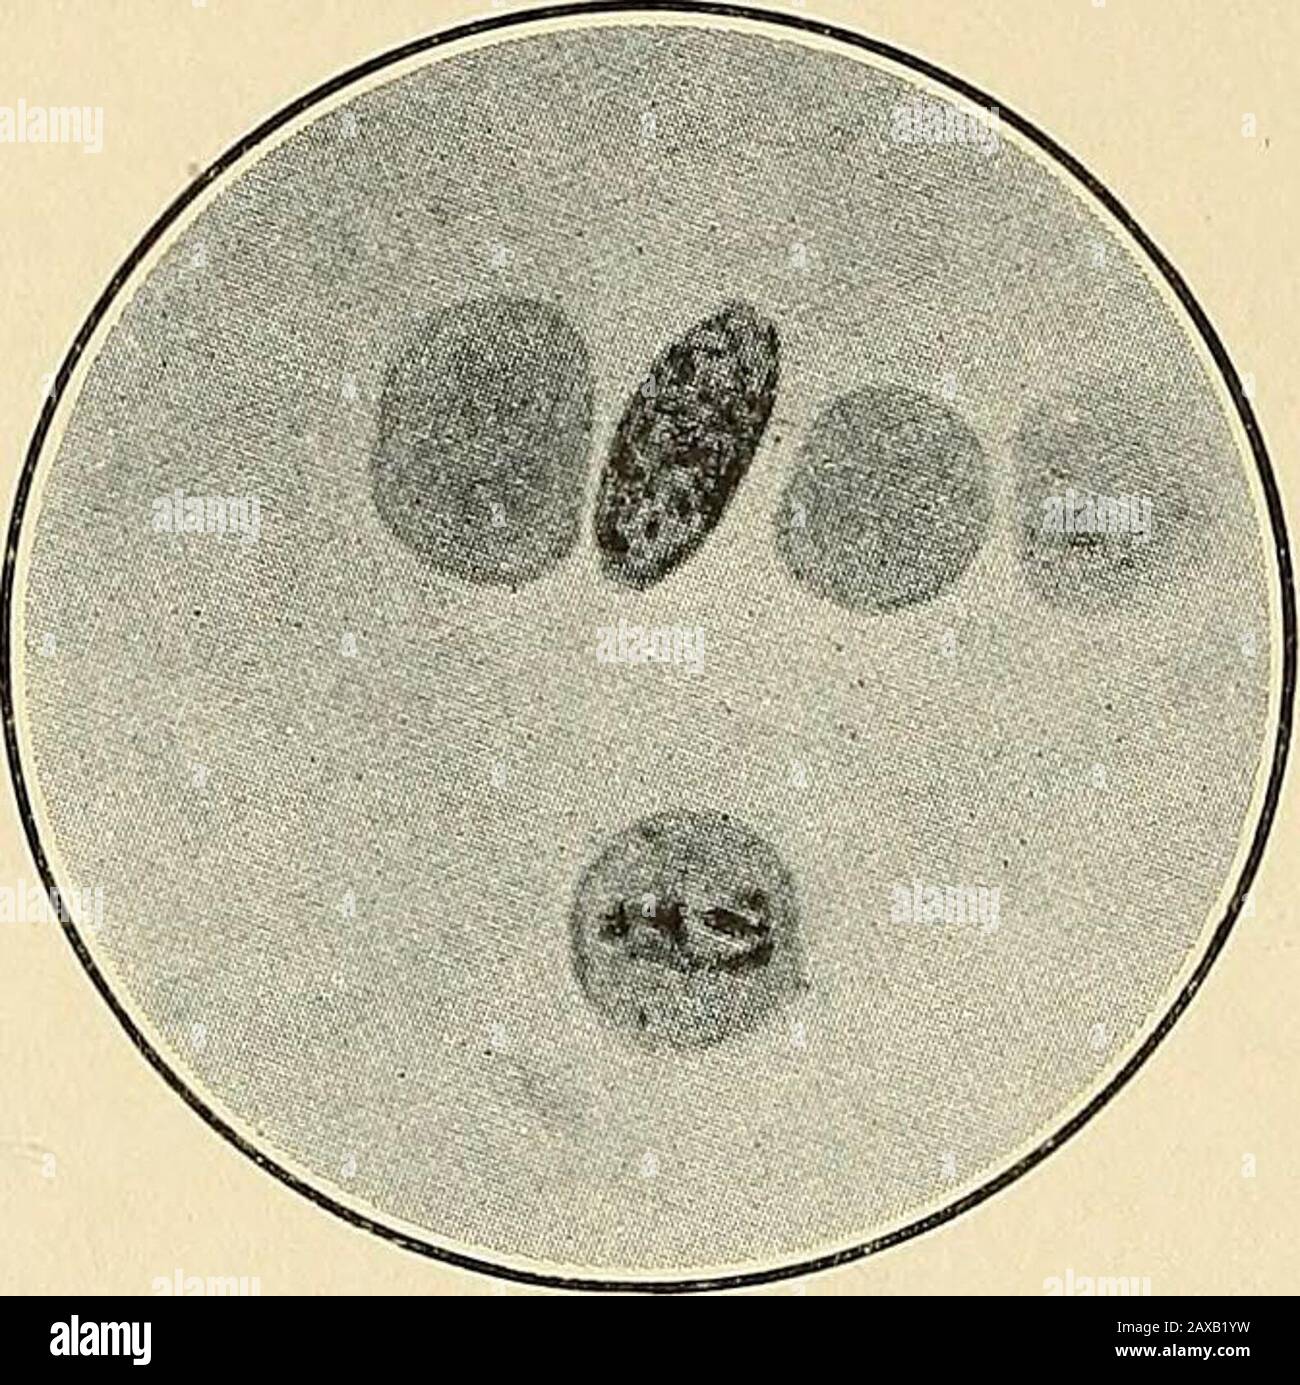 The malarial fevers, haemoglobinuric fever and the blood protozoa of man . val and later round in form, after which4 50 THE ETIOLOGY OF THE MALARIAL FEVERS. the microgametes or flagella are developed as in the other malarial plasmodia(see Fig. lo). Fresh Preparations.—The crescentic gametes of the aestivo-autumnalPlasmodia are developed within the red corpuscles and during their intra-corpuscular stage are distinguished from the schizonts by their limited amoeboidmotion, the early development of a greater amount of pigment within them,the crescentic or ovoid form acquired during the latter sta Stock Photo